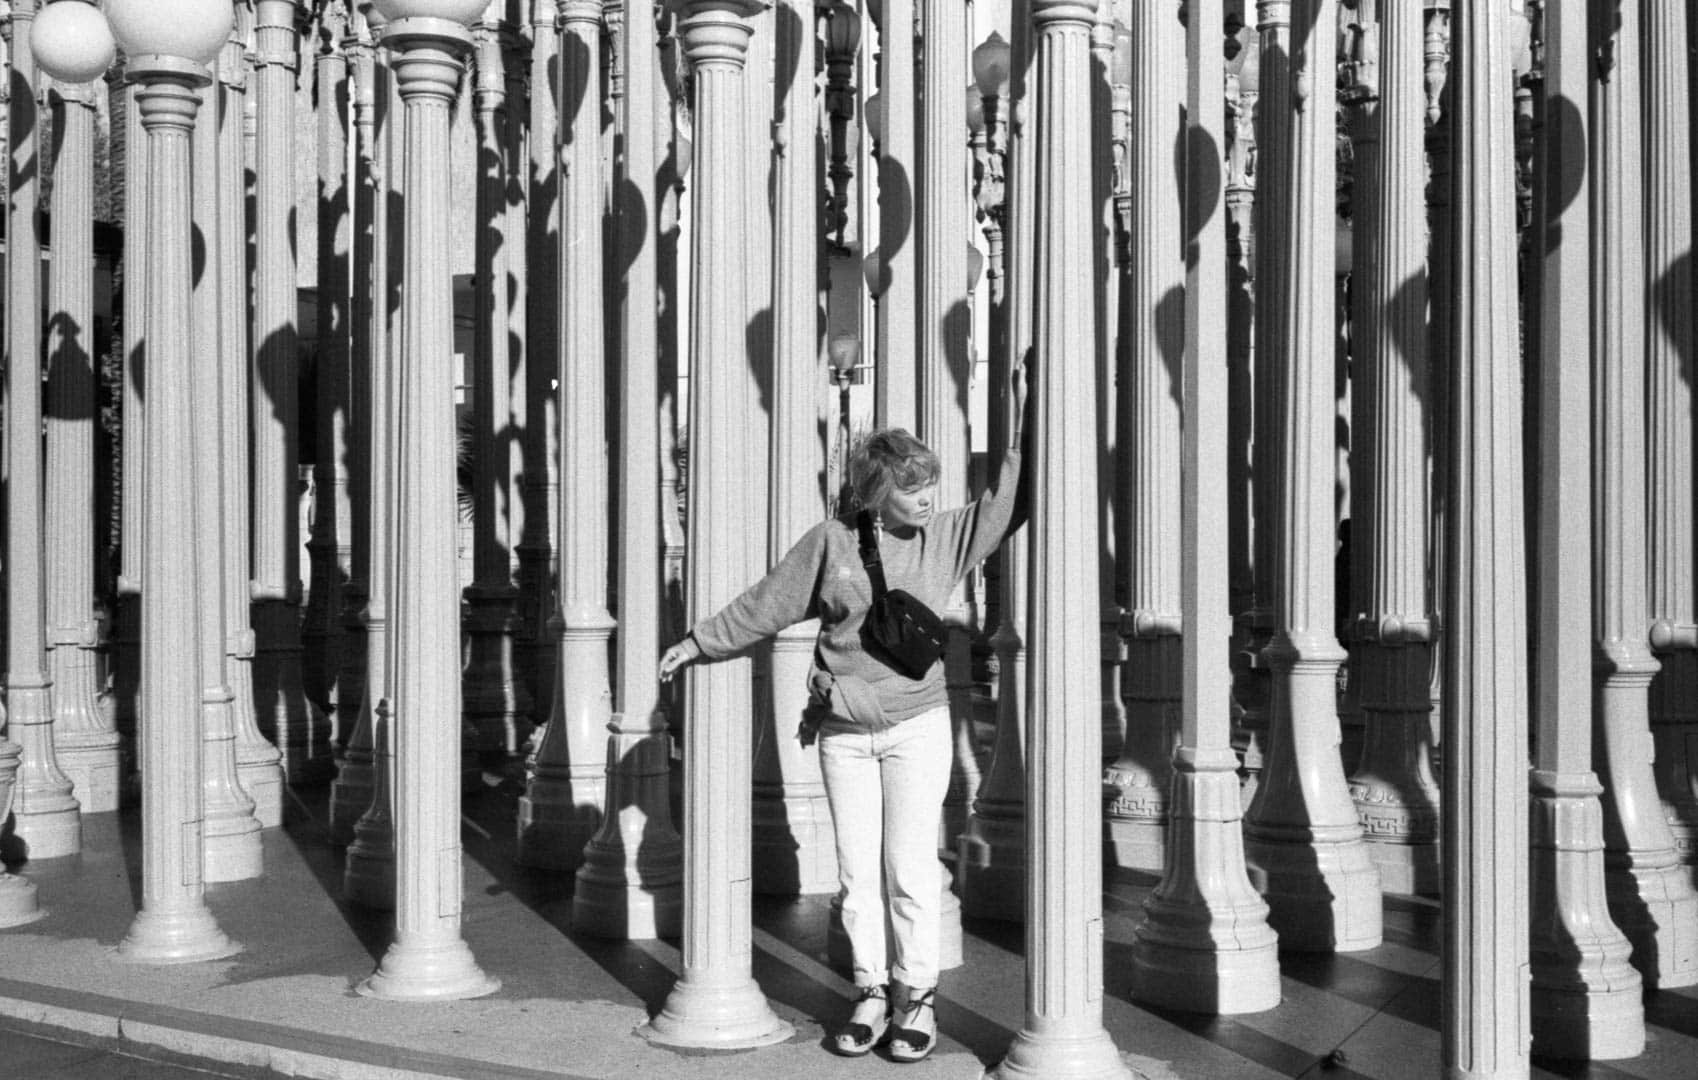 My wife at the street light piece outside LACMA